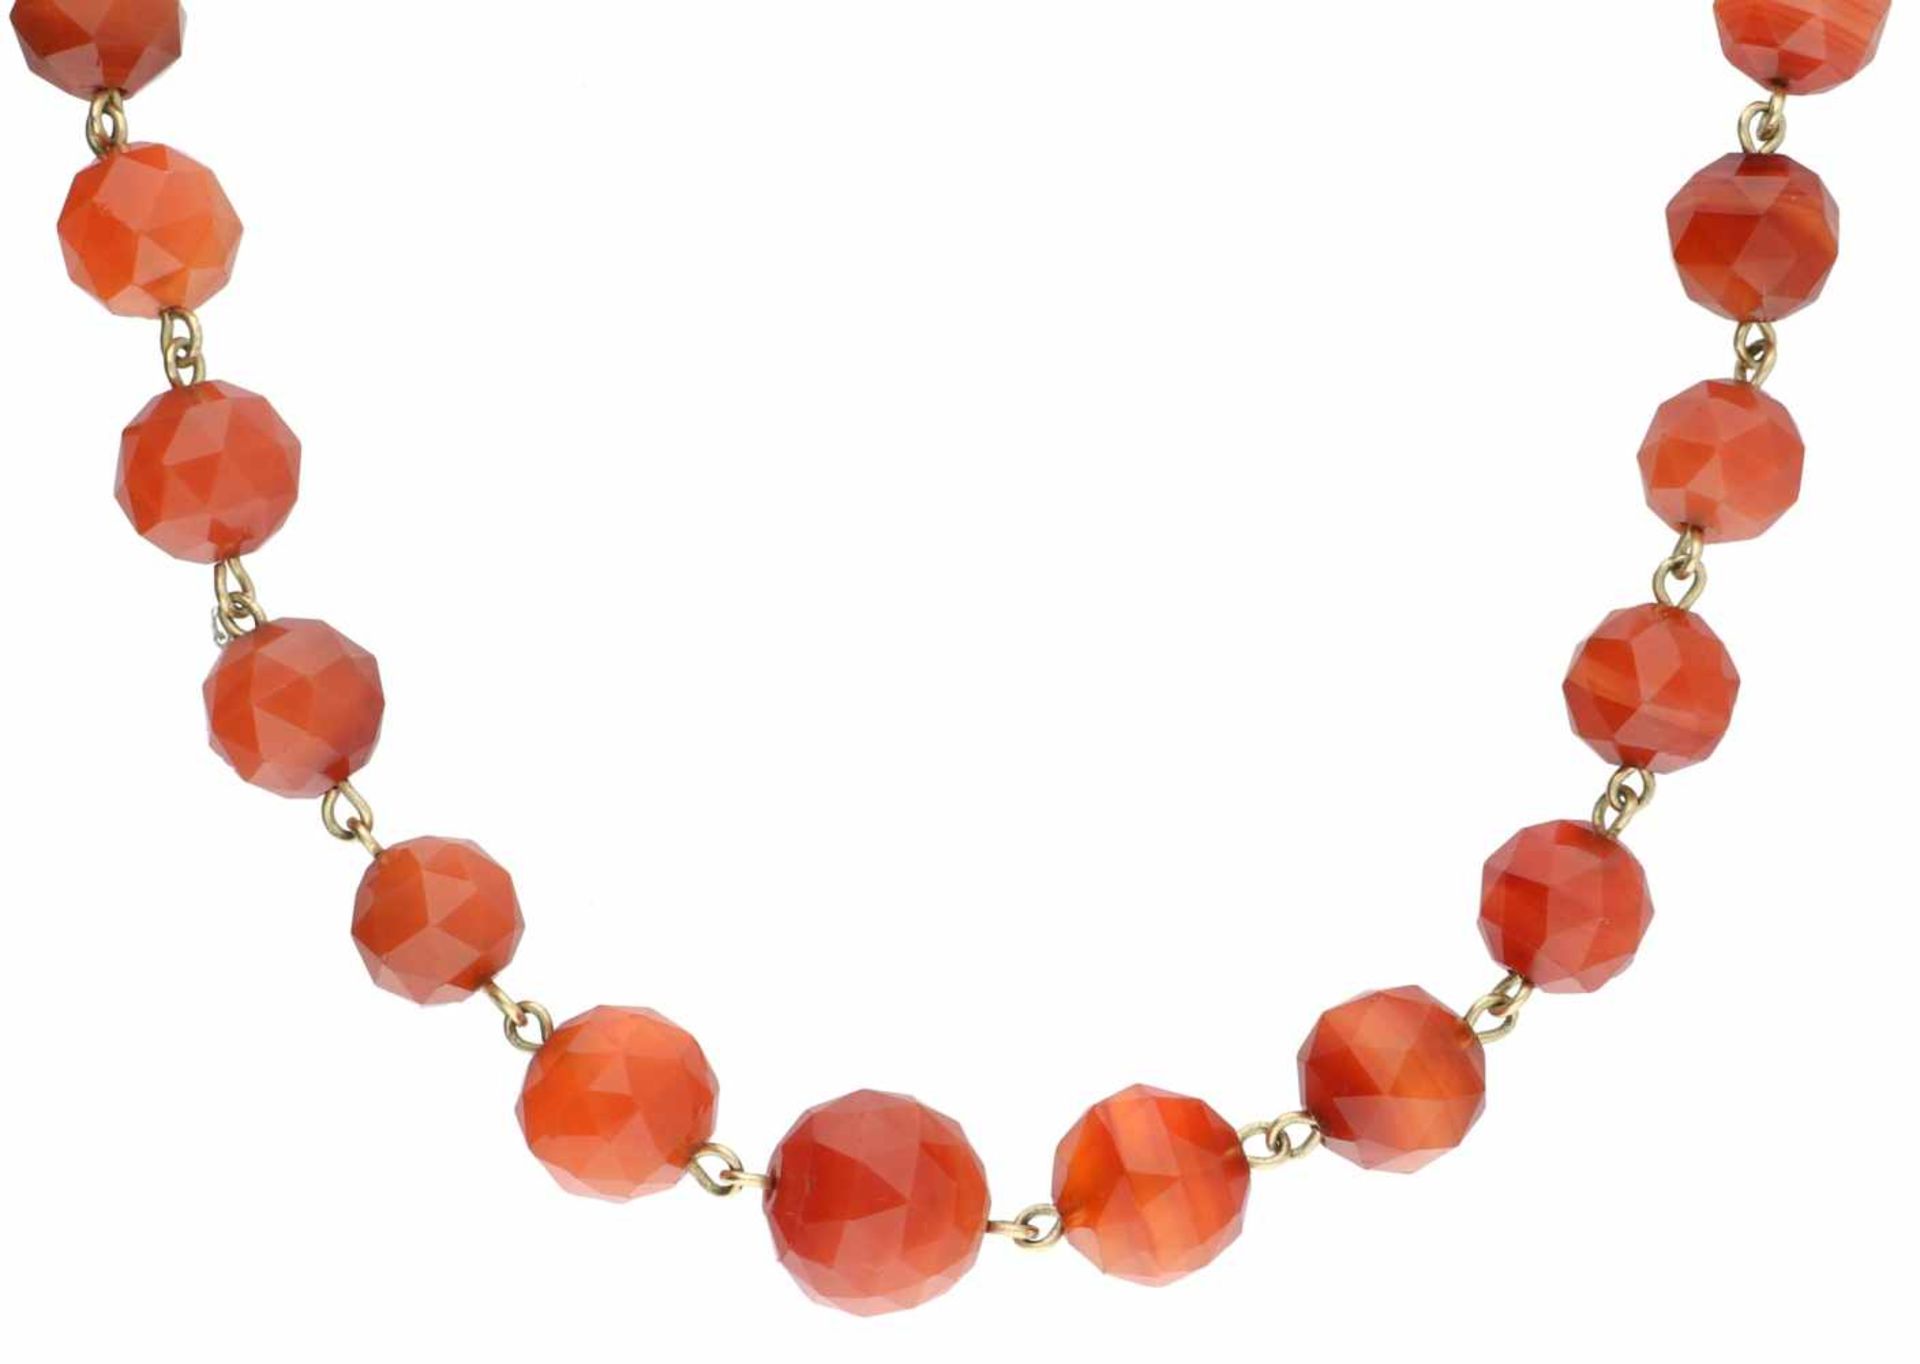 Collier geelgoud, rode agaat - BWG.L: 51 cm. Gewicht: 81,4 gram.Necklace yellow gold, red agate -